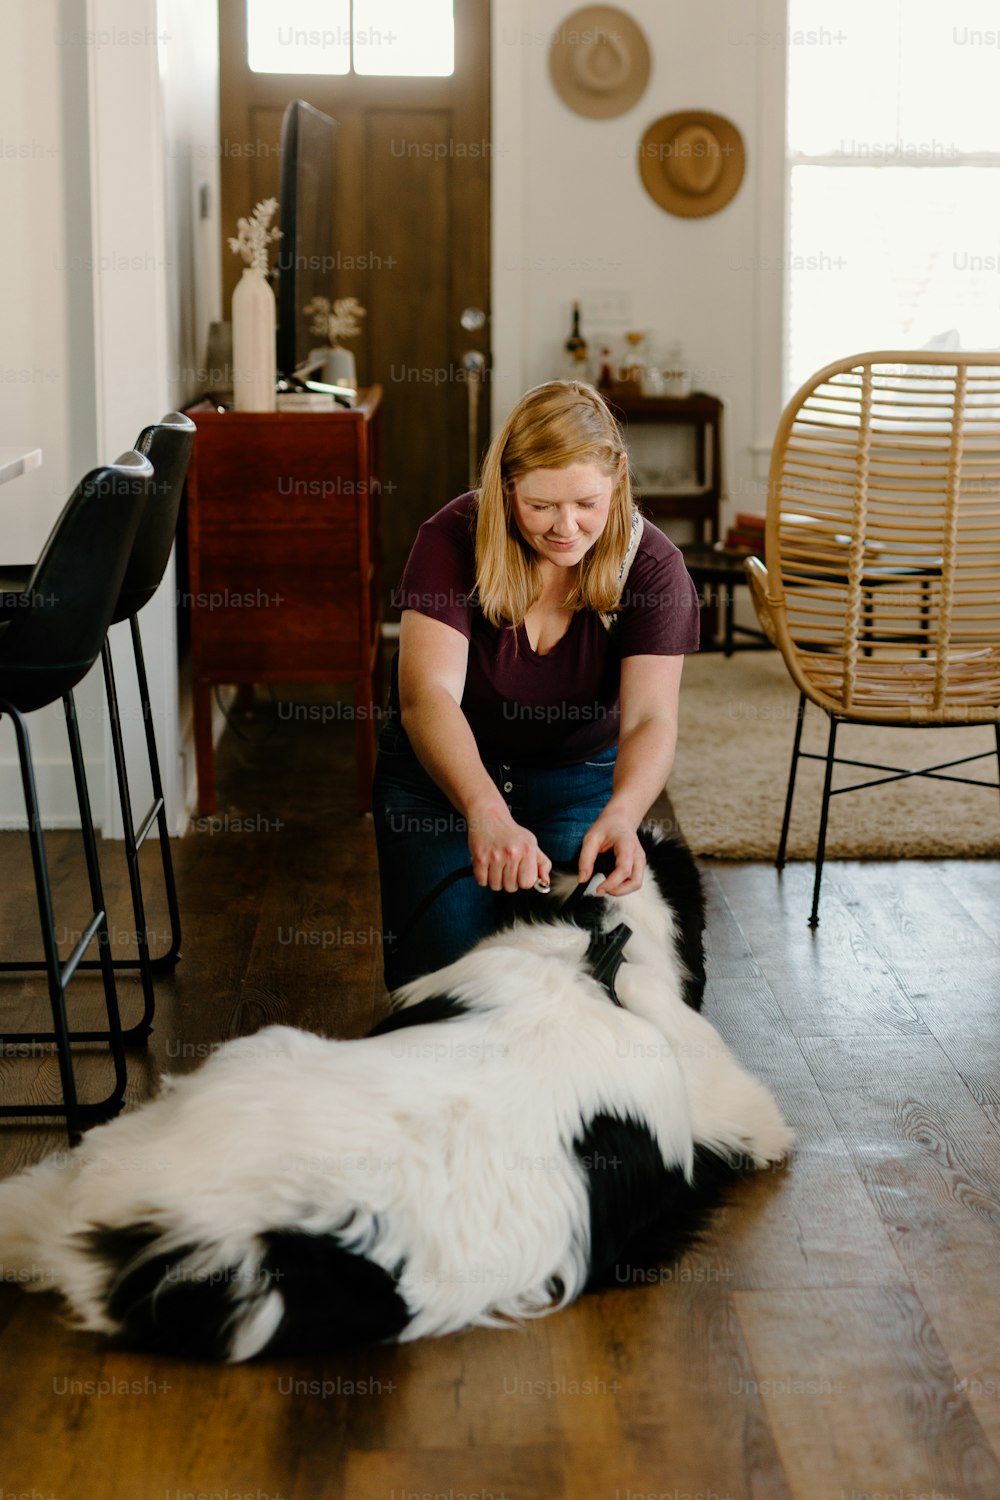 a woman sitting on the floor petting a black and white dog